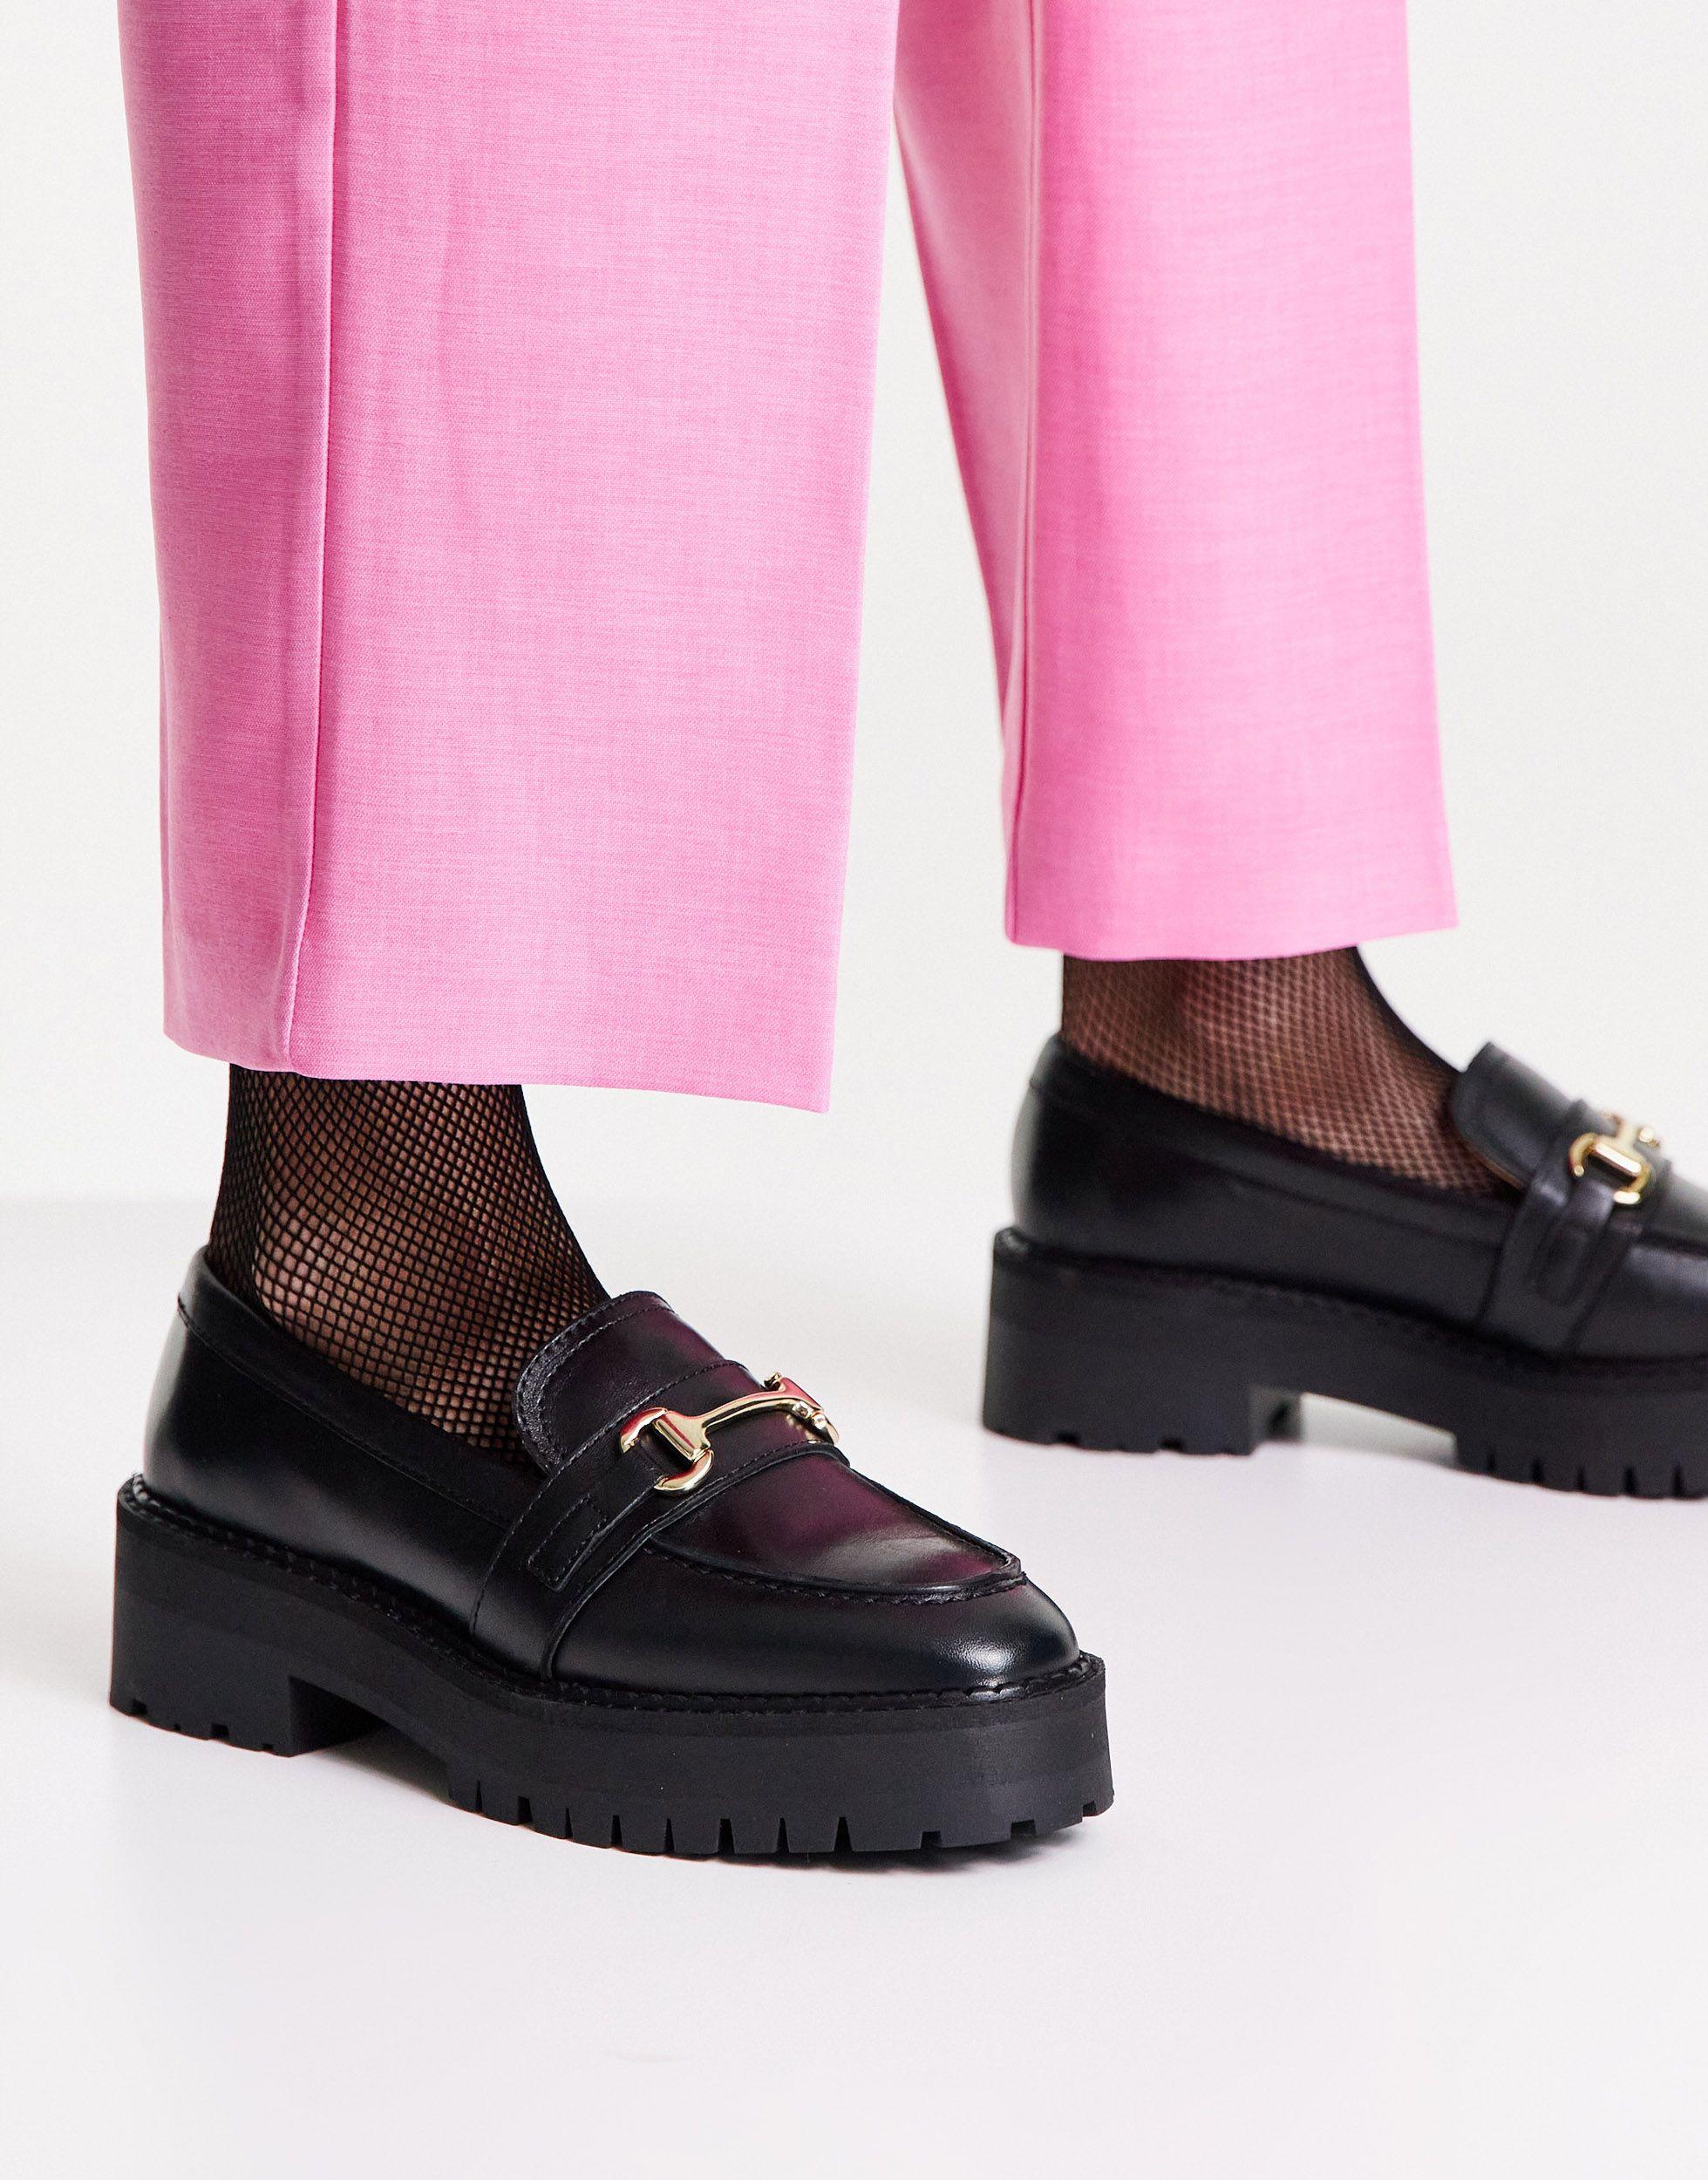 & Other Stories Leather Chunky Sole Loafers in Black